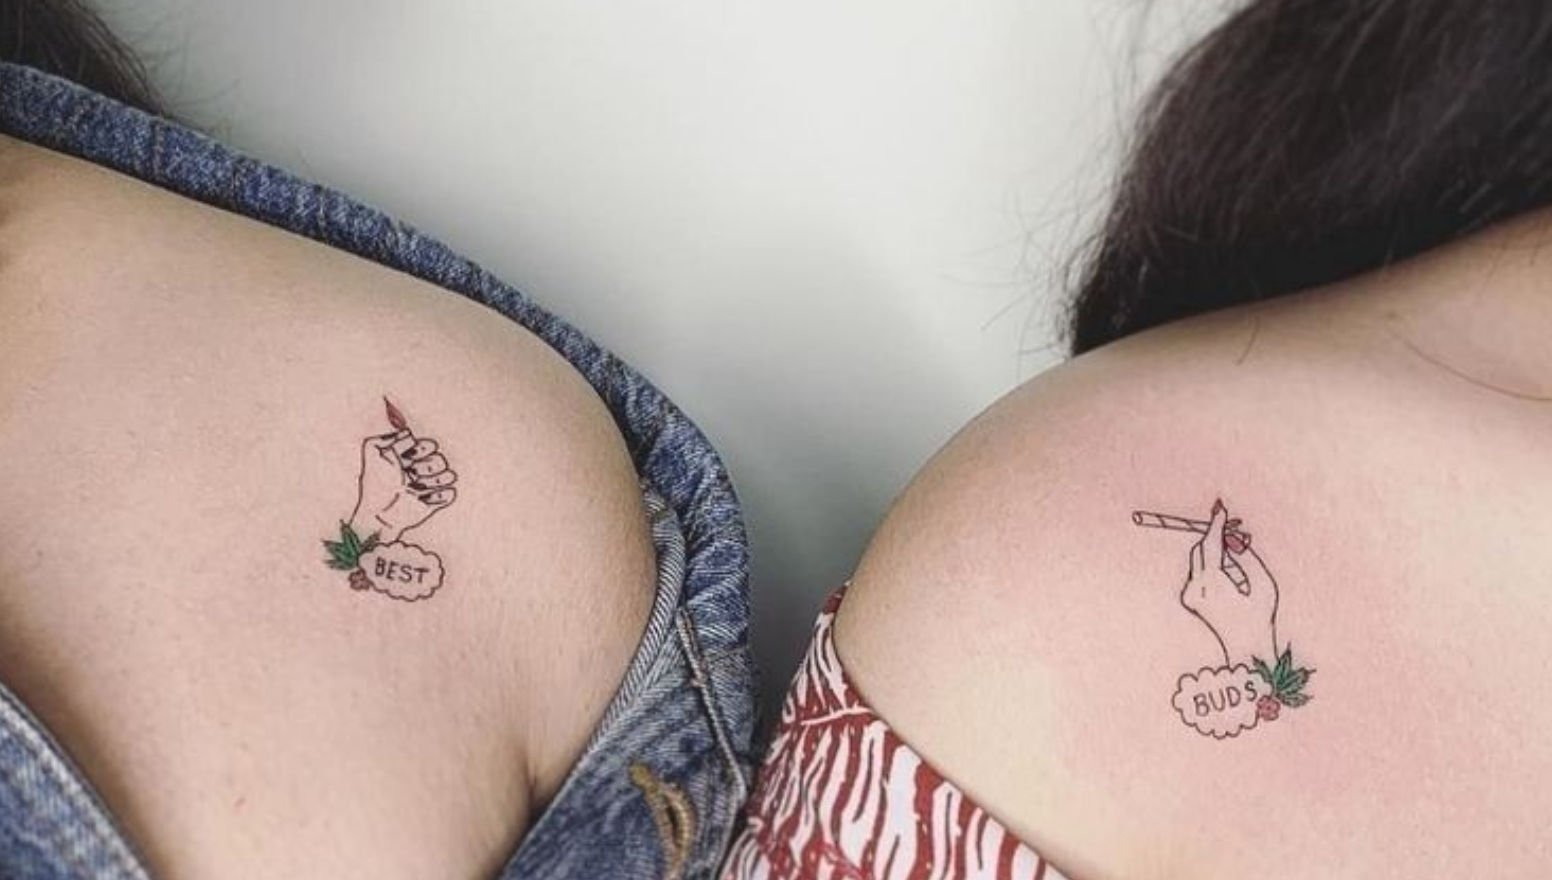 These People Love Marijuana So Much They Got It Tattooed  Pacific Seed Bank